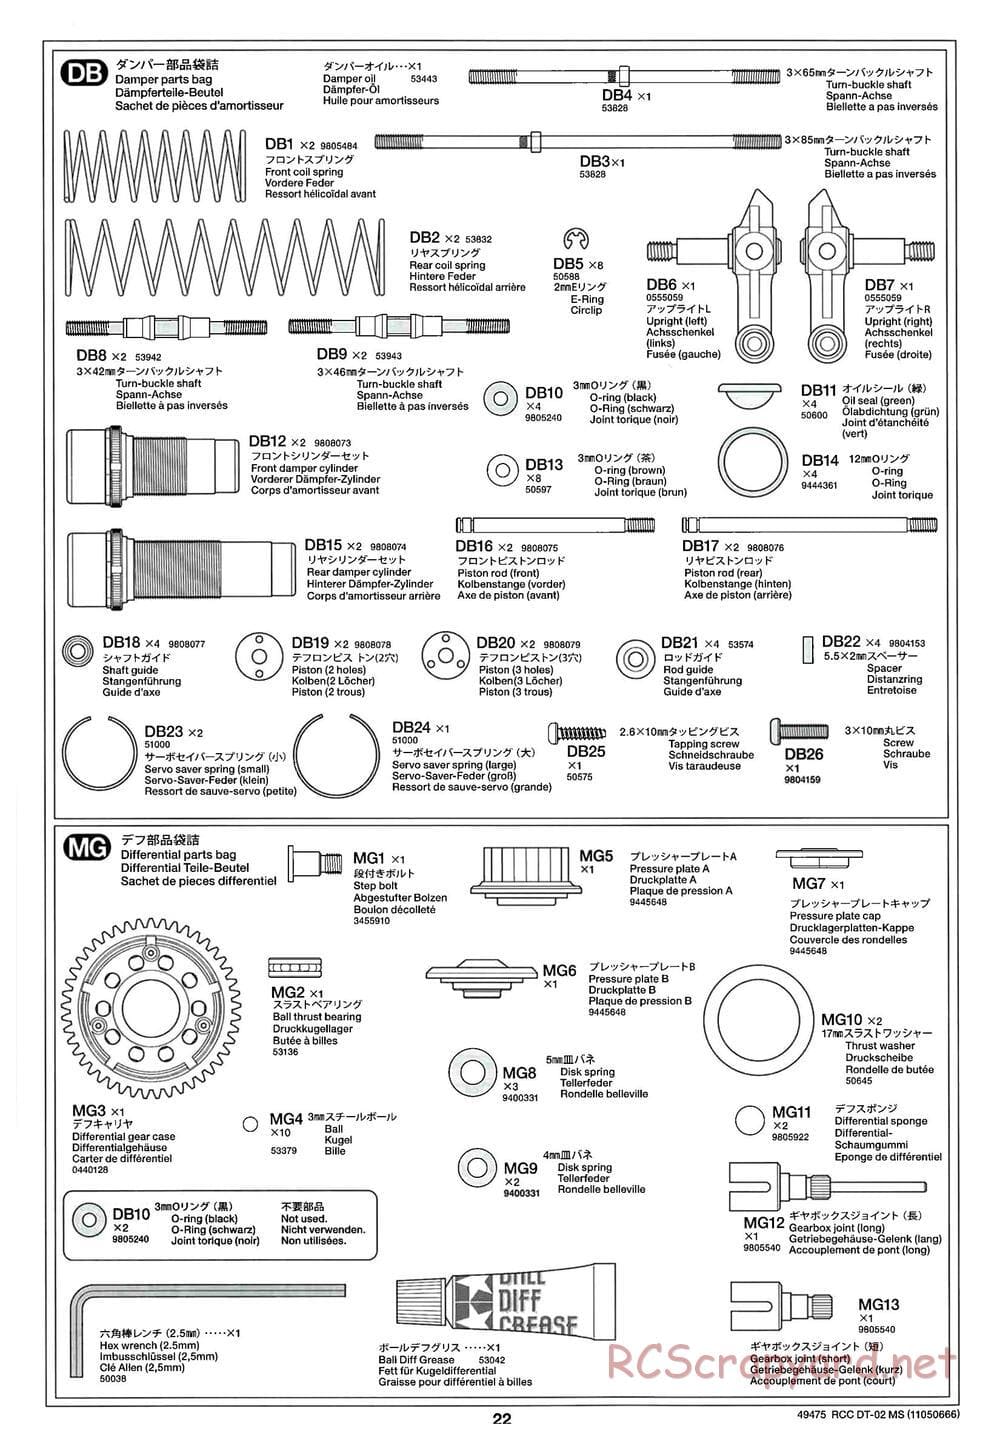 Tamiya - DT-02 MS Chassis - Manual - Page 23